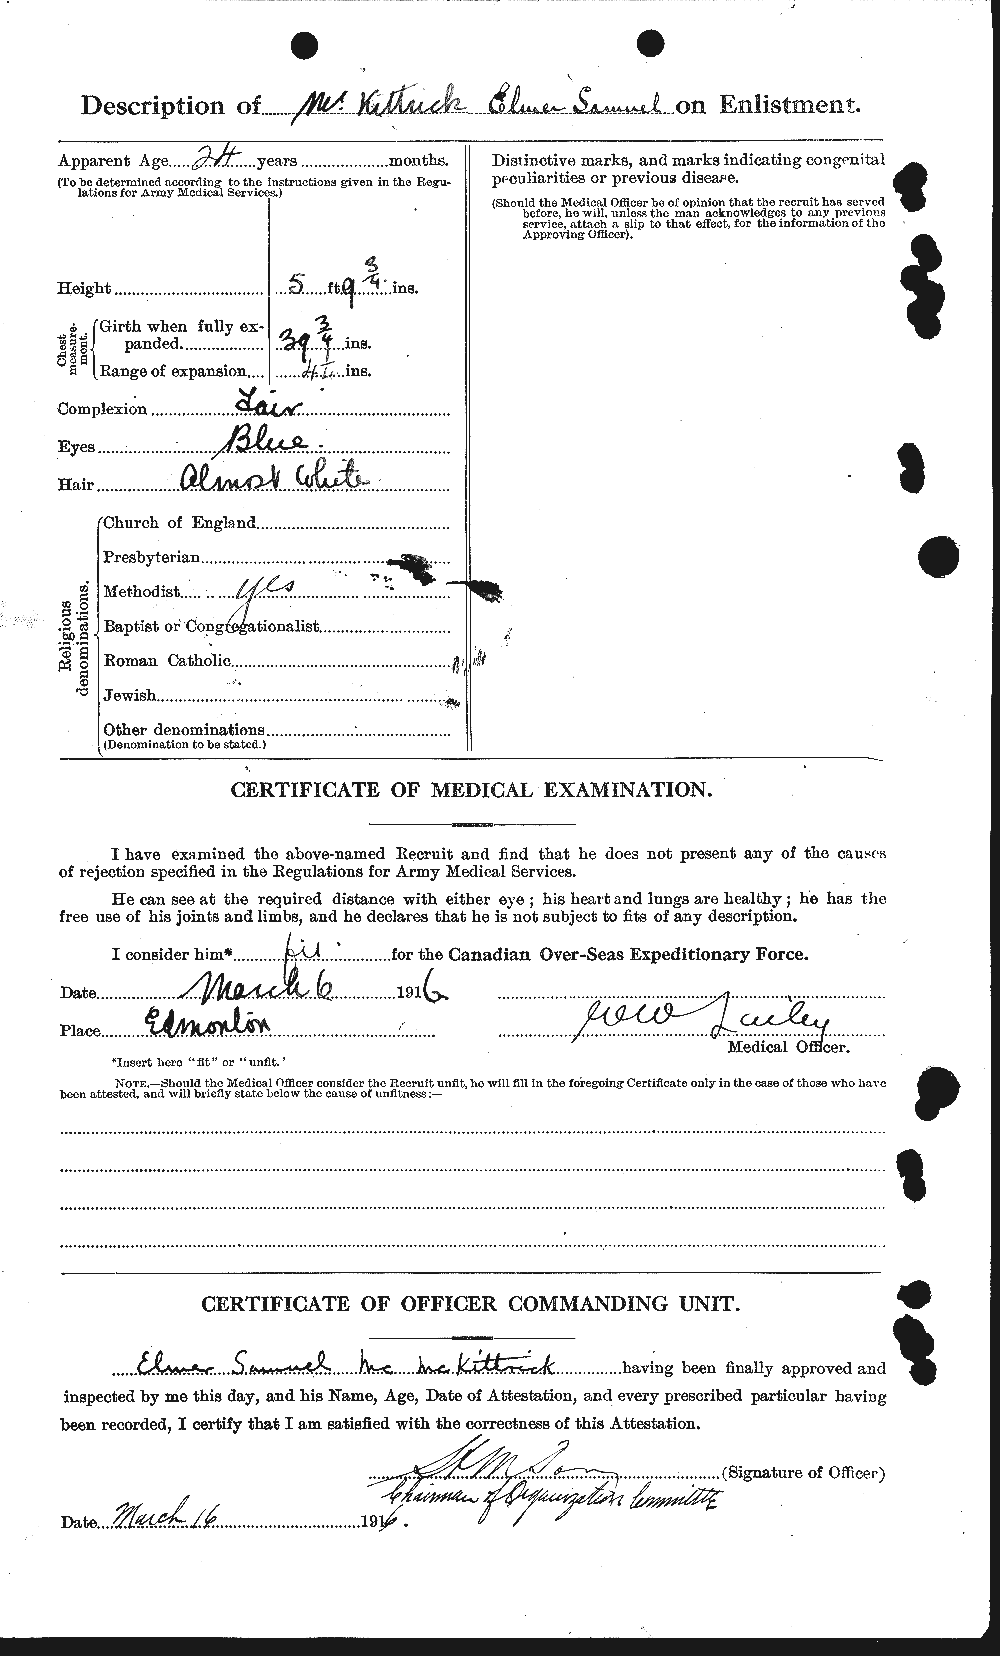 Personnel Records of the First World War - CEF 530669b